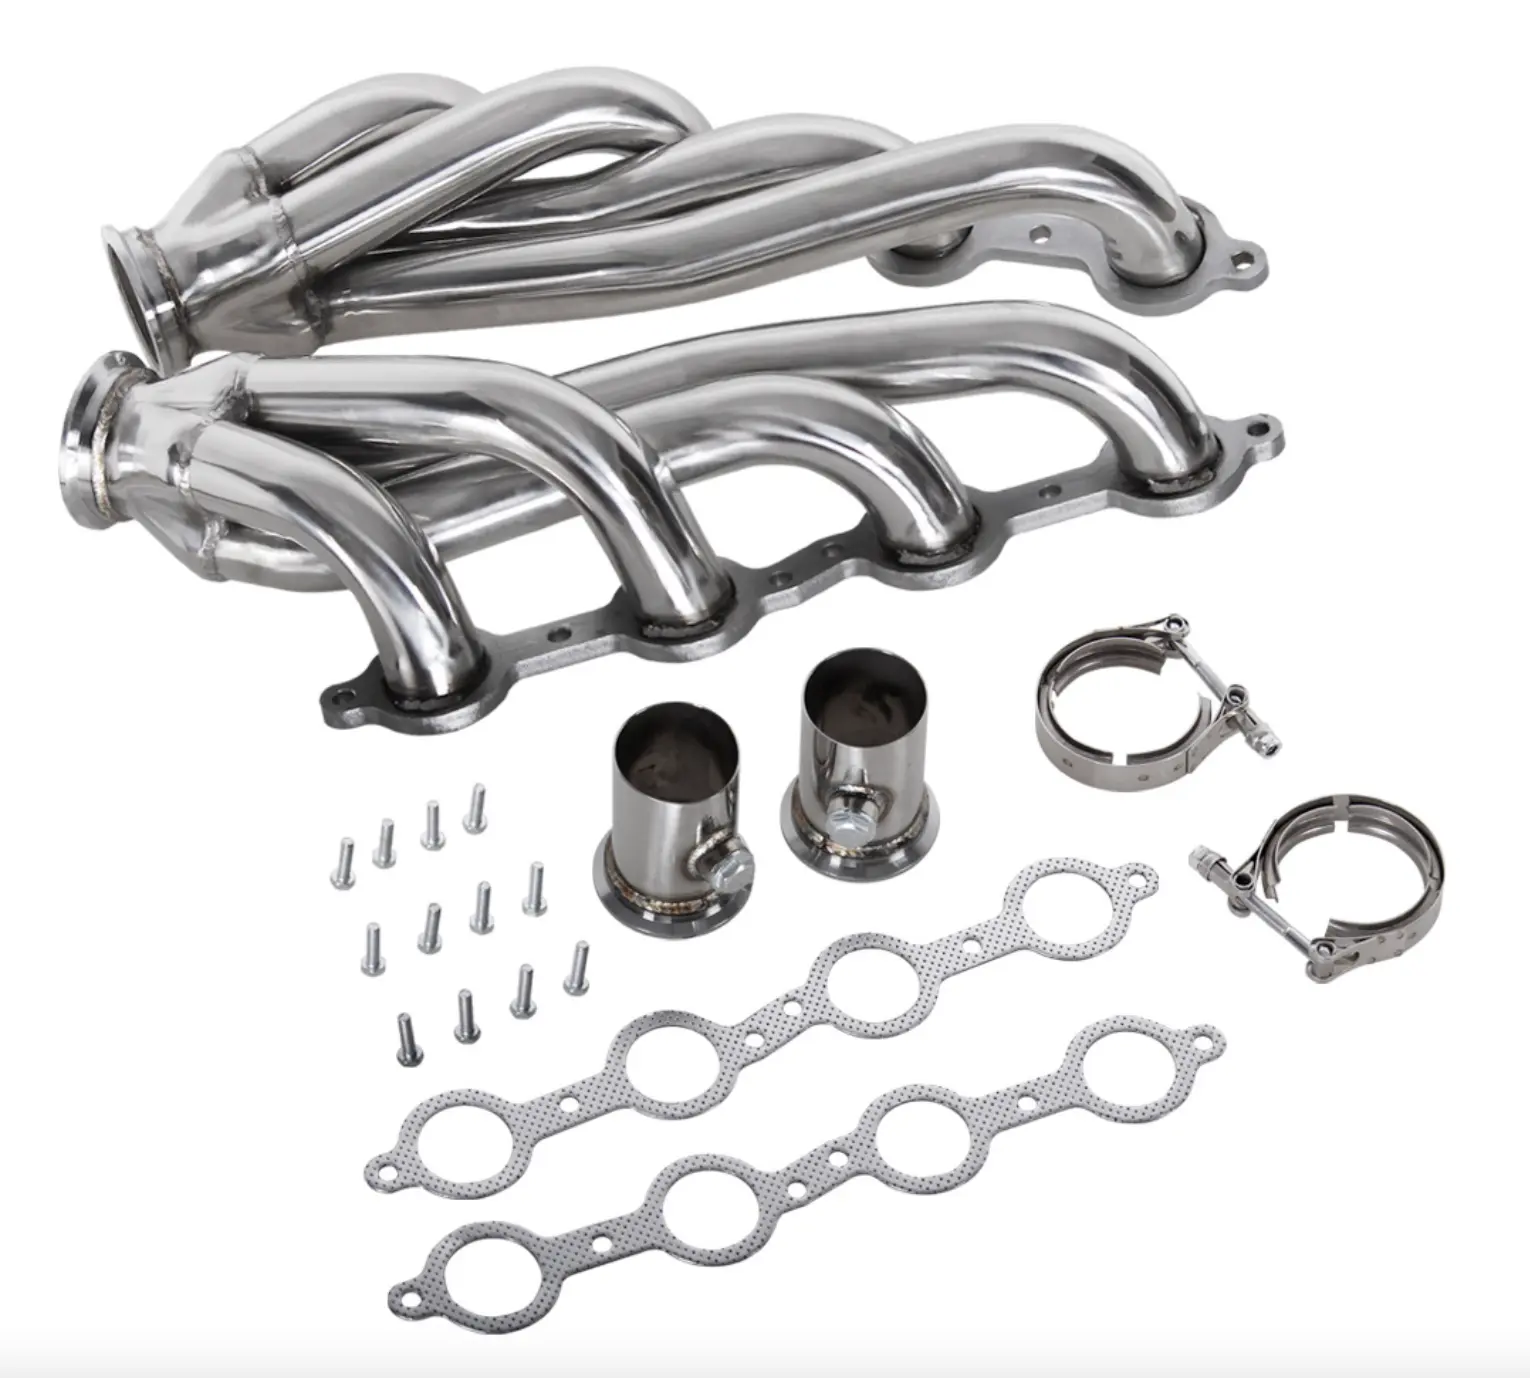 Stainless Steel Exhaust Manifold for C10 LS Conversion Swap LS1 LS2 LS3 LS6